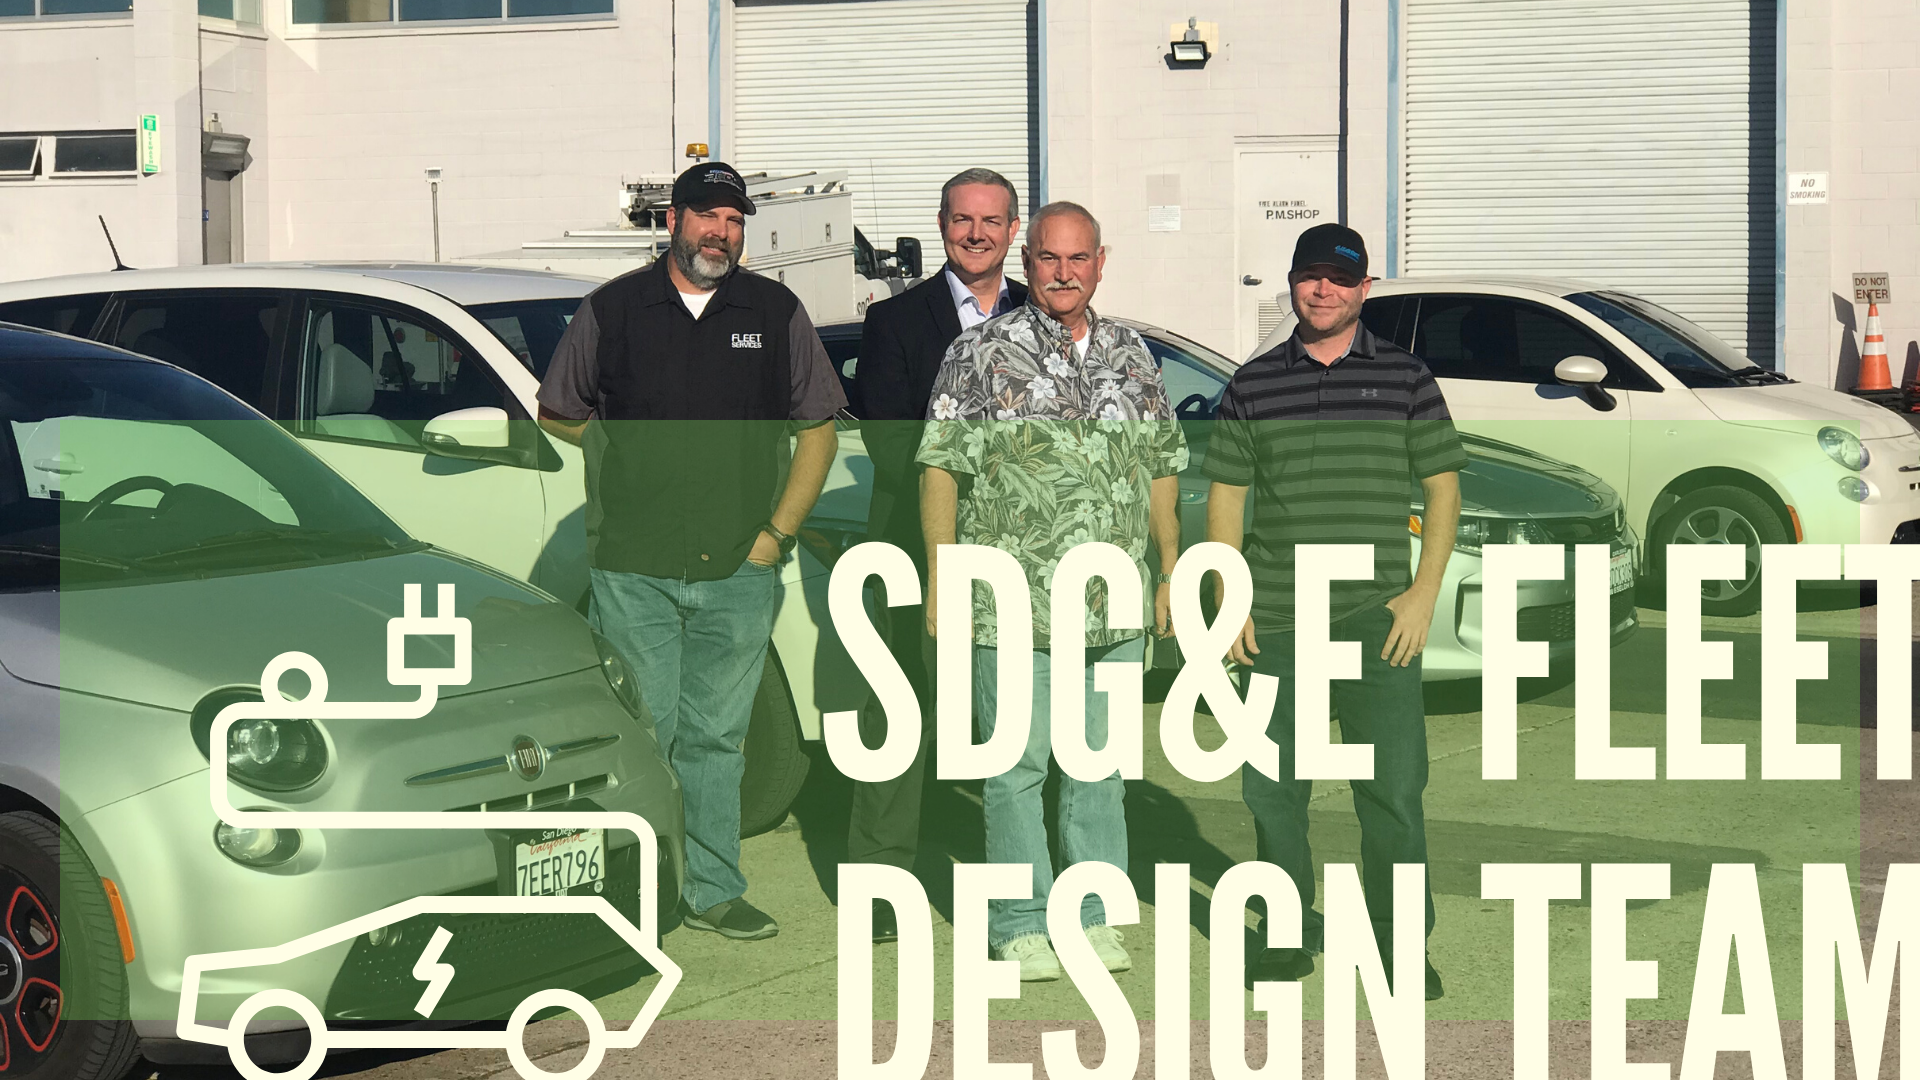 Top Takeaways from SDG&E’s Fleet Design Team on the Benefits Driving Electric at Home